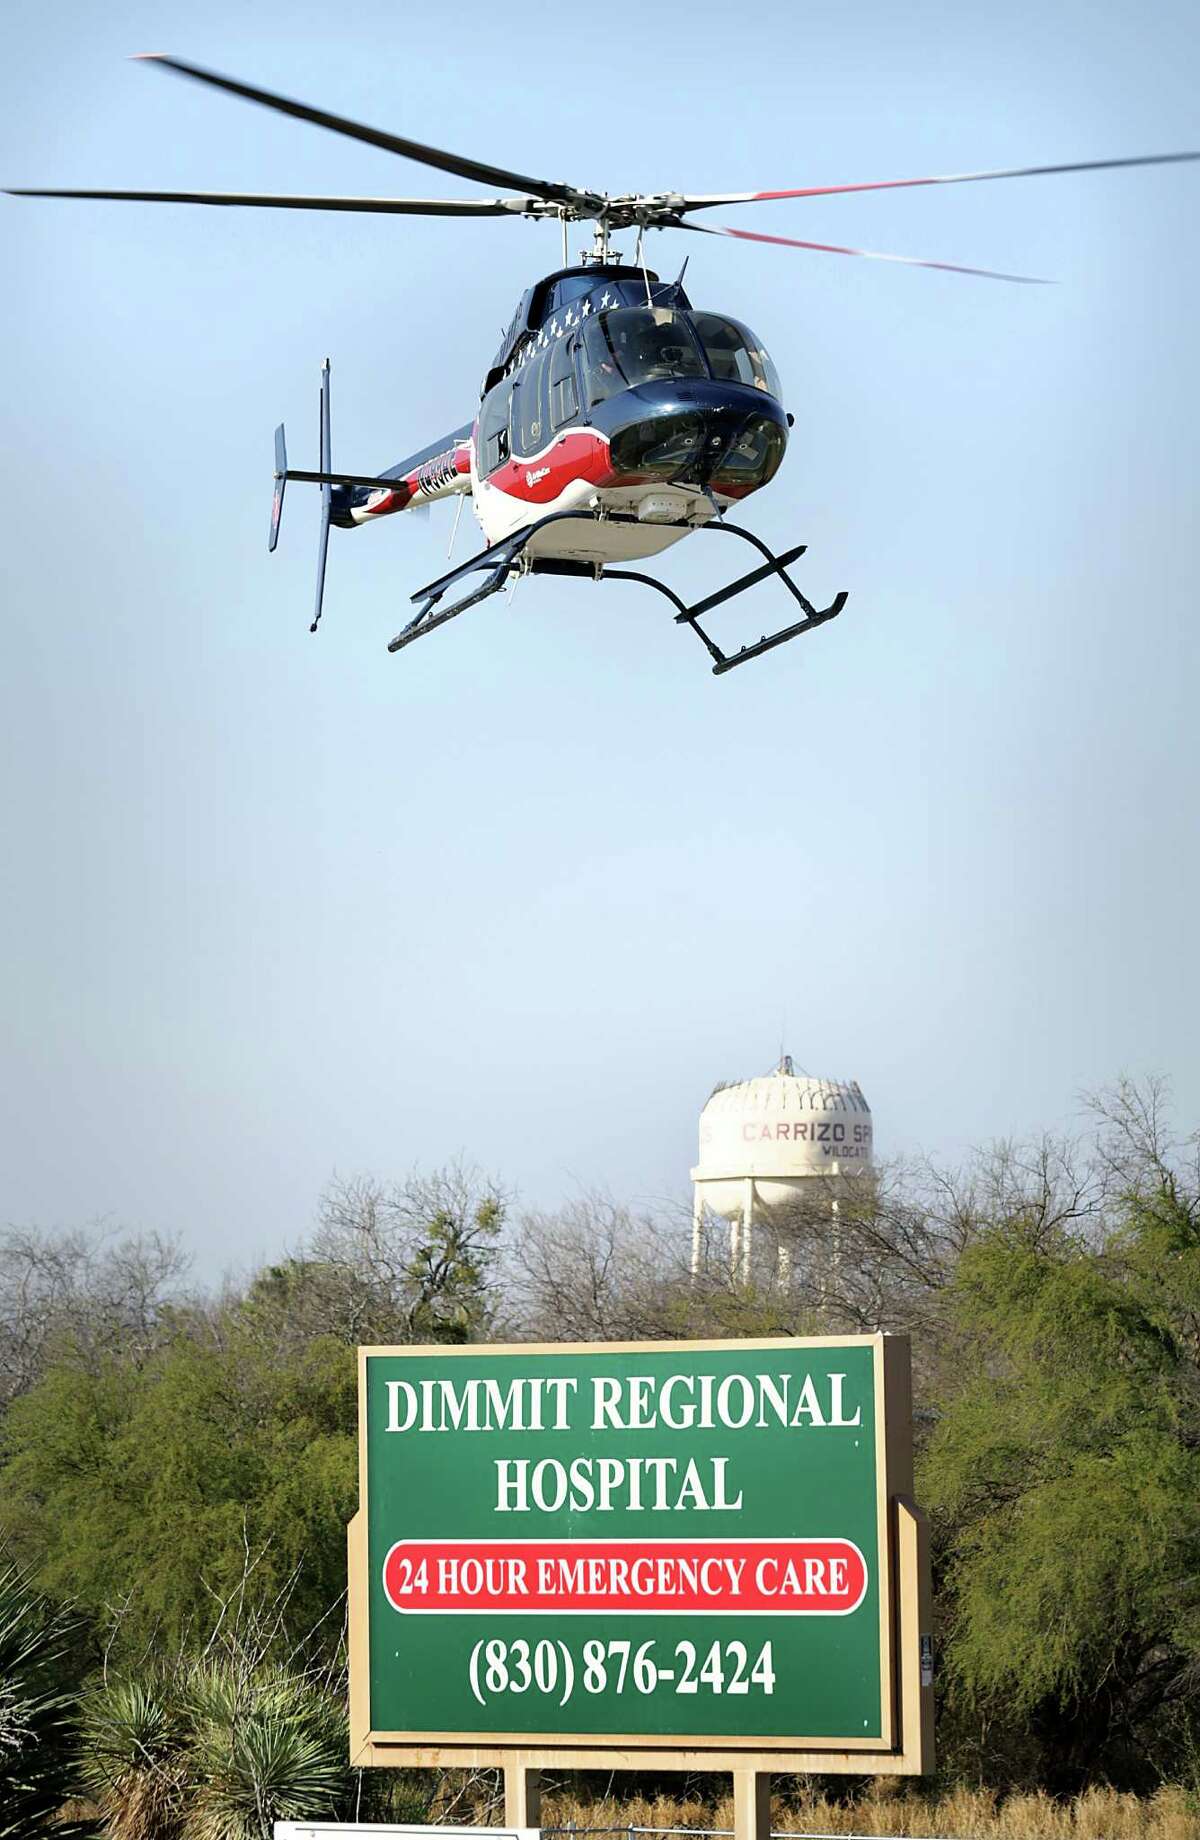 An Air Evac helicopter takes off from its pad next to Dimmit County Regional Hospital. Methodist Healthcare CEO Kevin Moriarty said emergency response in remote areas of South Texas can take an hour or two.